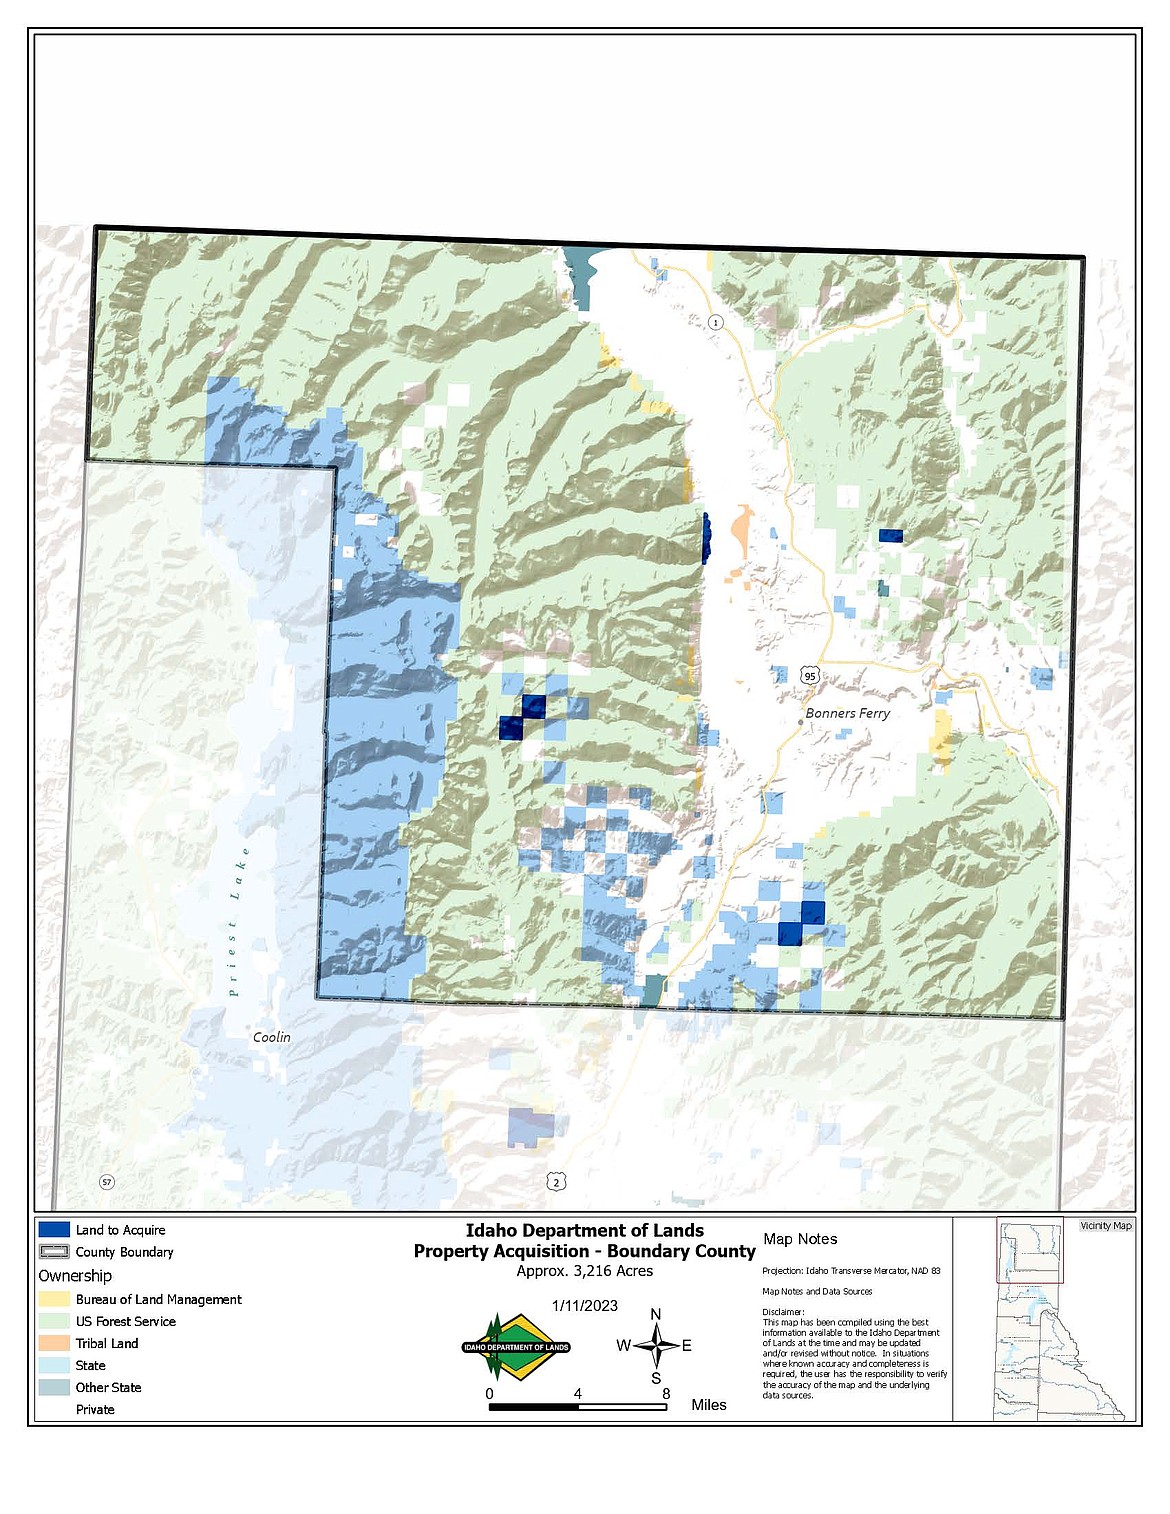 Idaho Department of Lands announced it purchased almost 18,050 acres of timberland spread across five north Idaho counties. Above, a map shows the location of the parcels purchased in Boundary County.